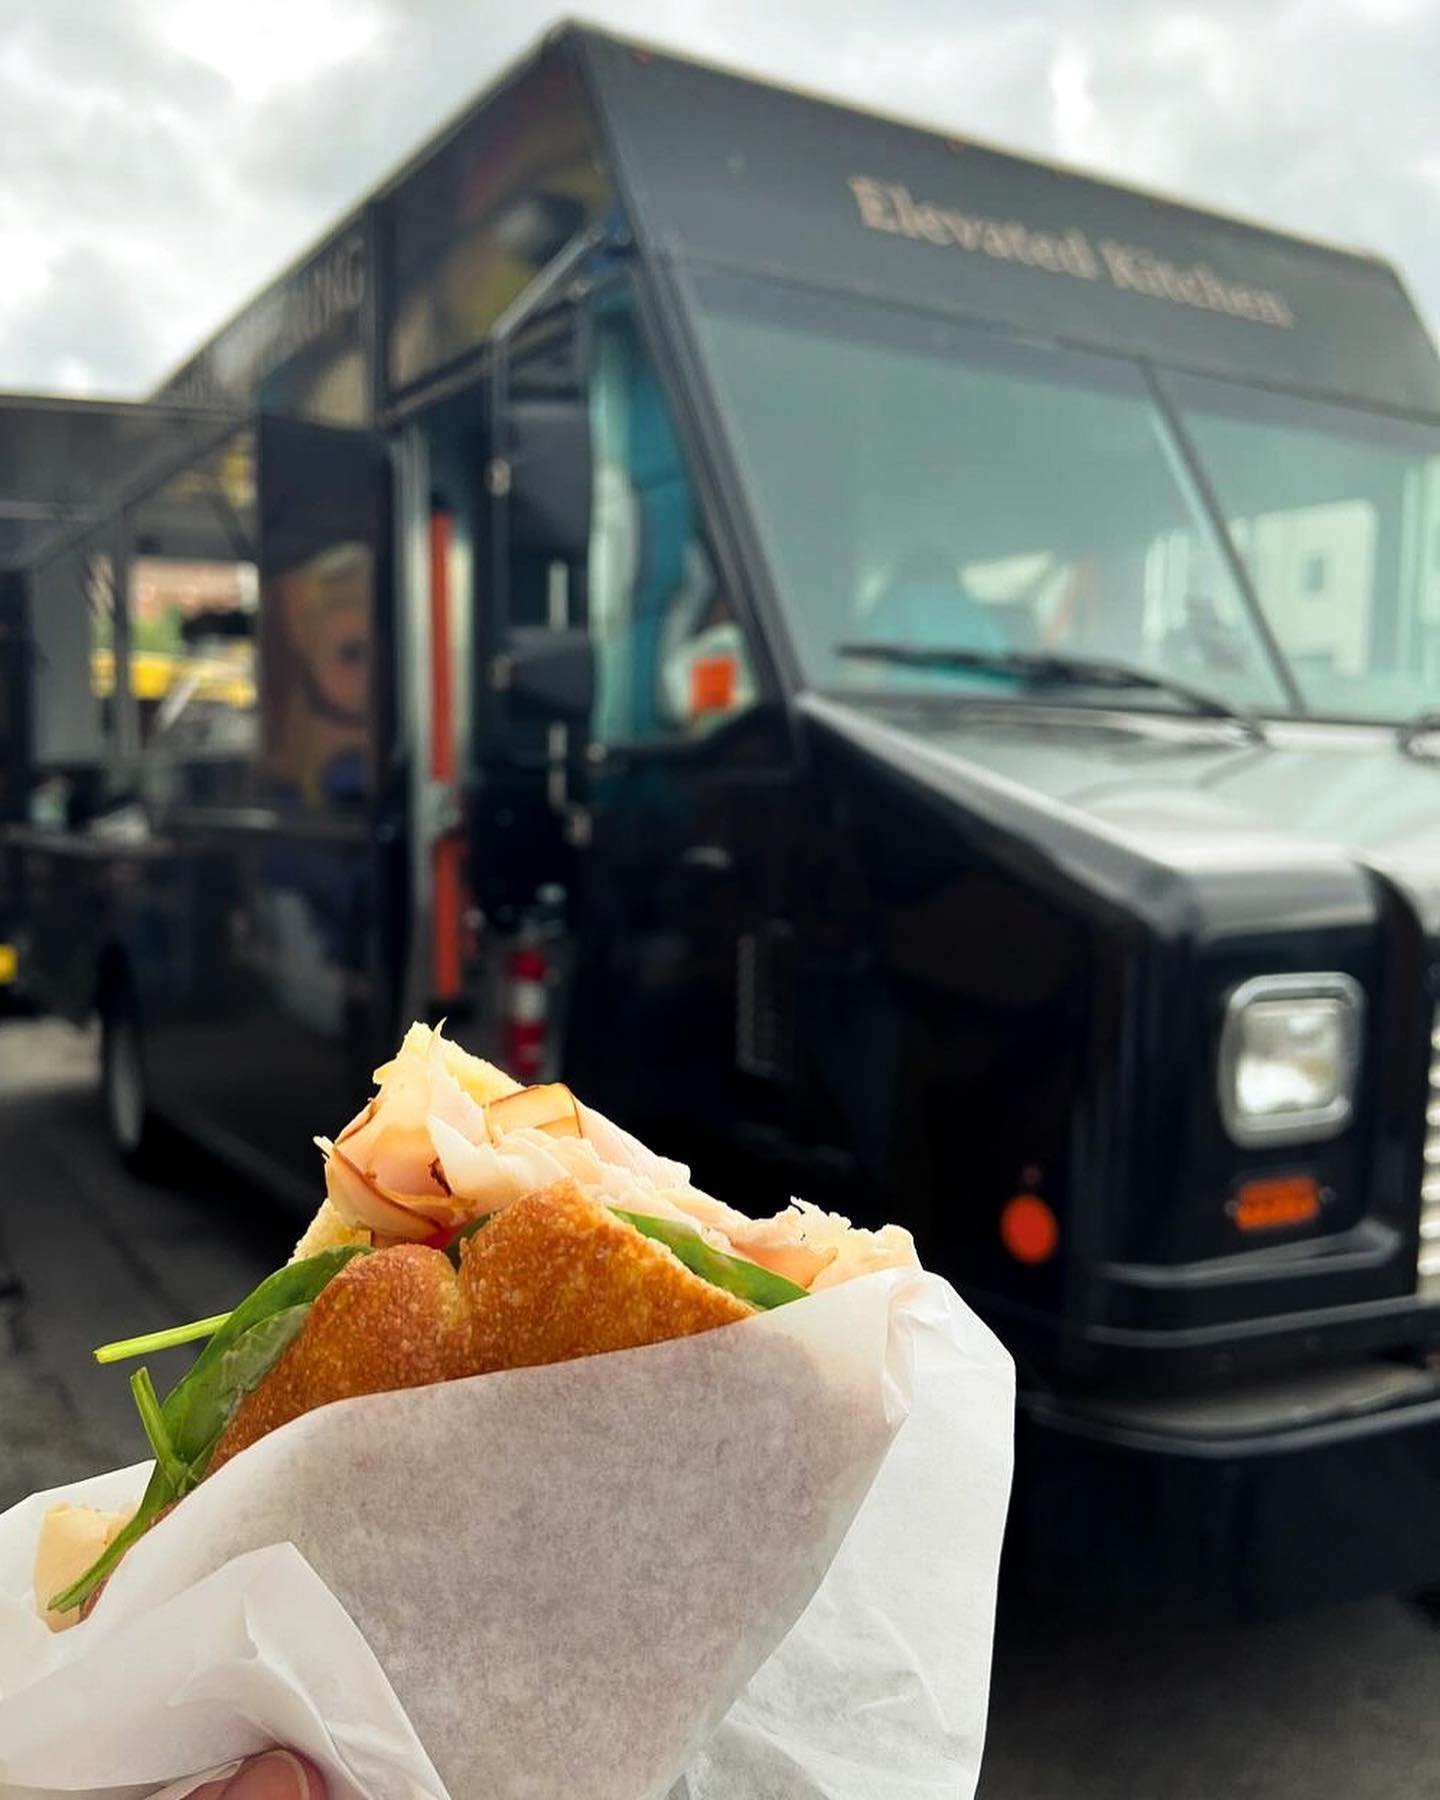 Join us for a delicious Friday! 
@elevatedkitchen614 will be serving 12-8p (new truck &amp; menu from our friends at Elevated Wood Fired Pizza)
Mike&rsquo;s Blackout BBQ 4-9p
Taco Mania 4-9p
Ciao Cafe Gelato 5-8p
Live Music w. Brandi Sparks 6-9p (mus